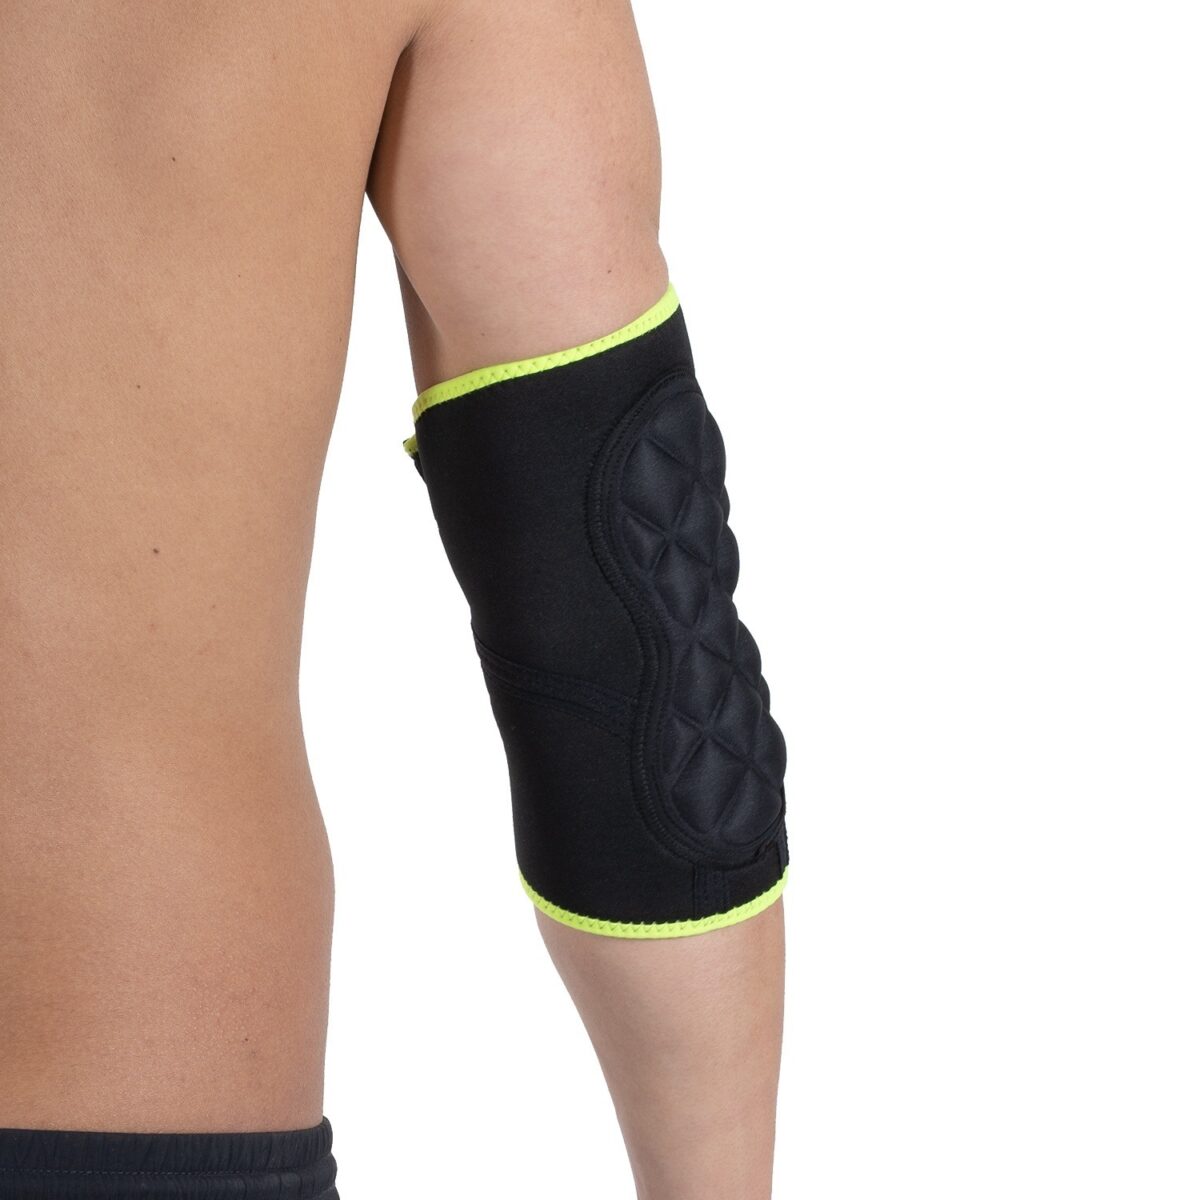 wingmed orthopedic equipments W206 sportive elbow support with pad 1